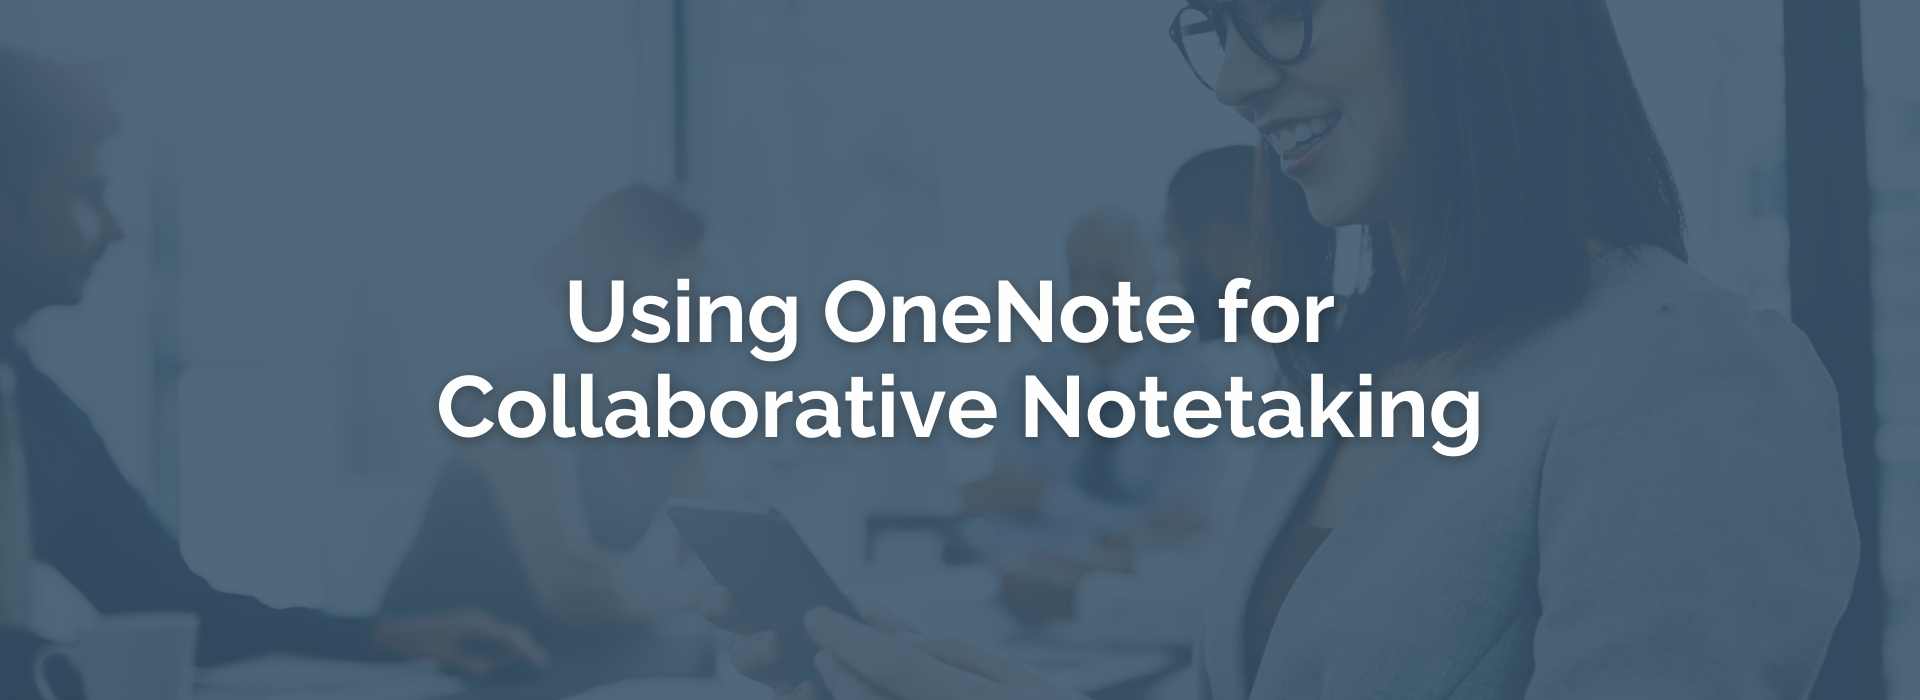 Using OneNote in Dynamics for Collaborative Note Taking